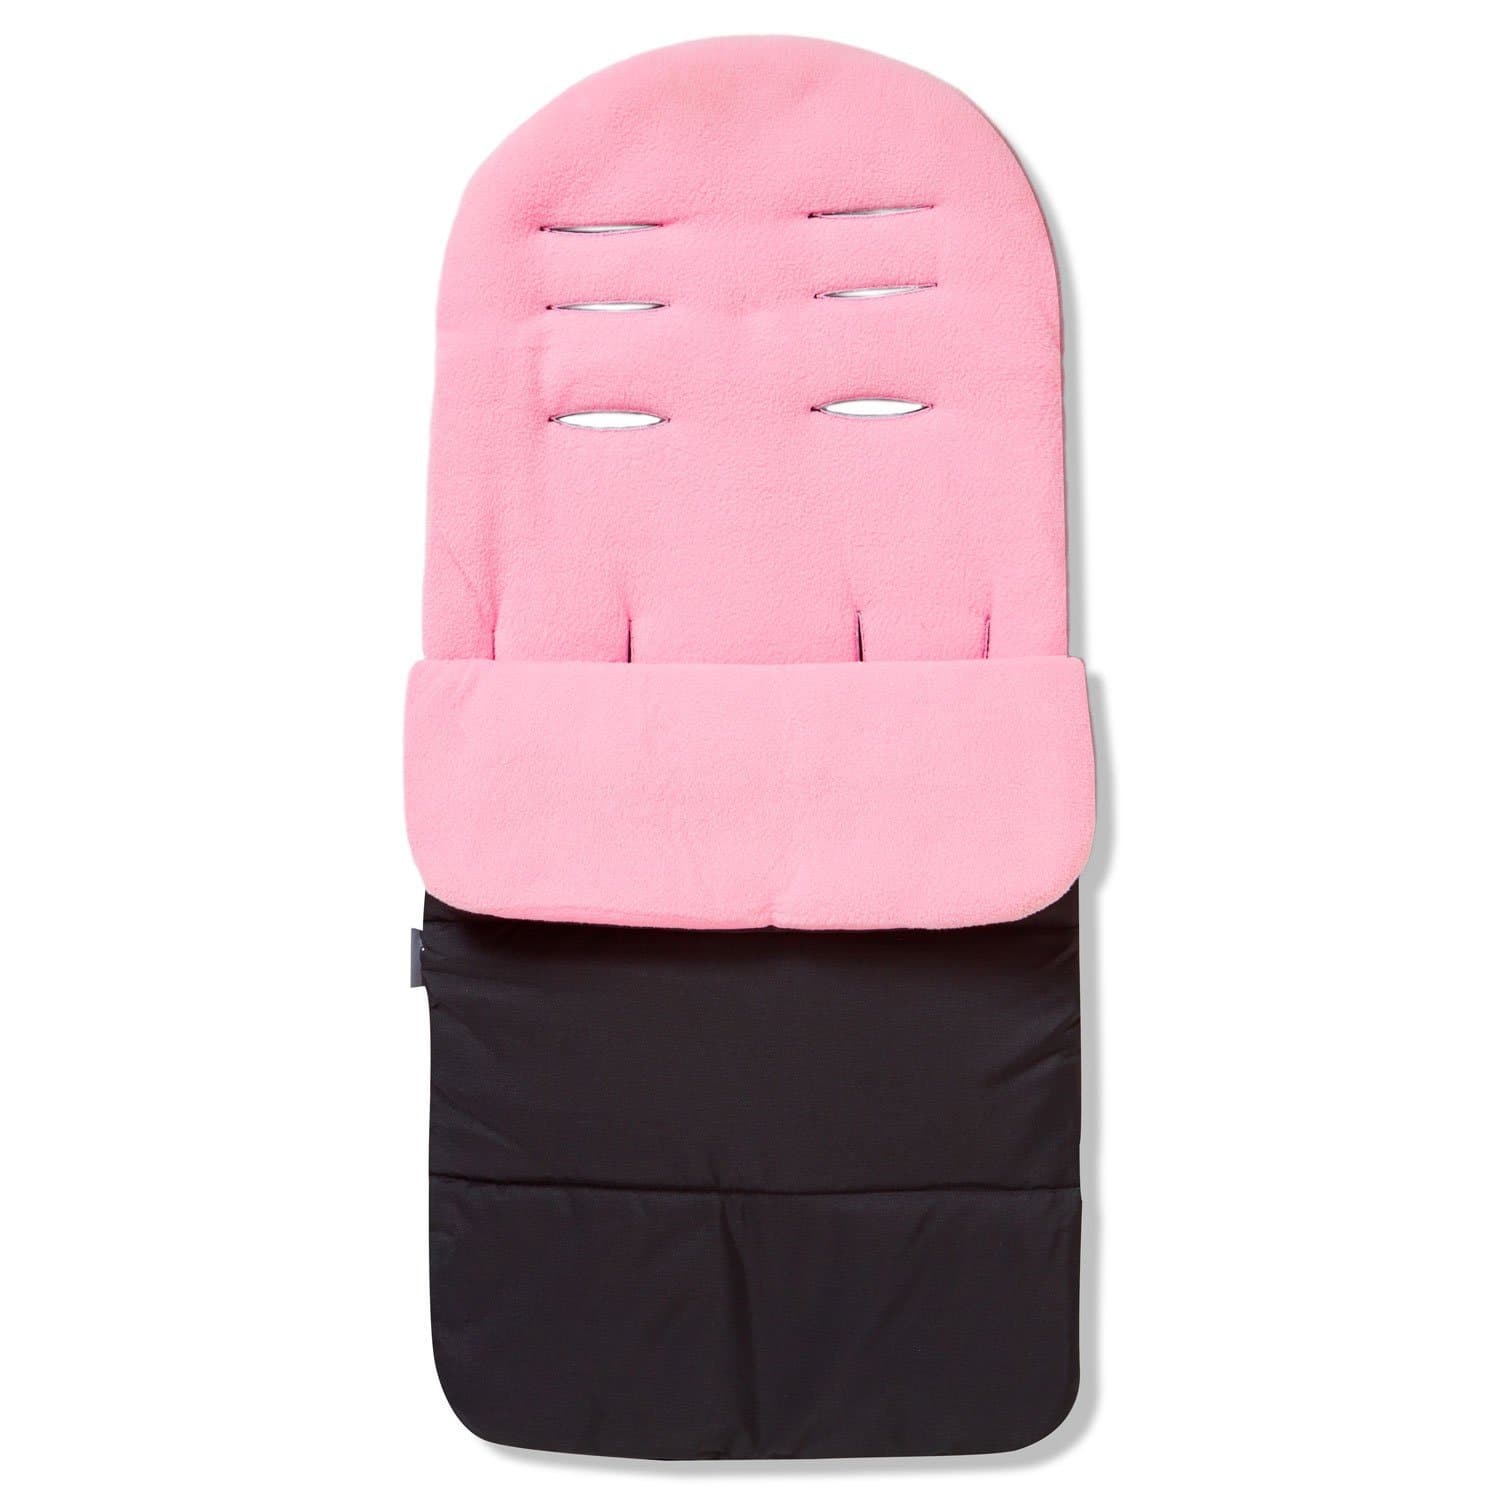 Premium Footmuff / Cosy Toes Compatible with BOB - Candy Pink / Fits All Models | For Your Little One